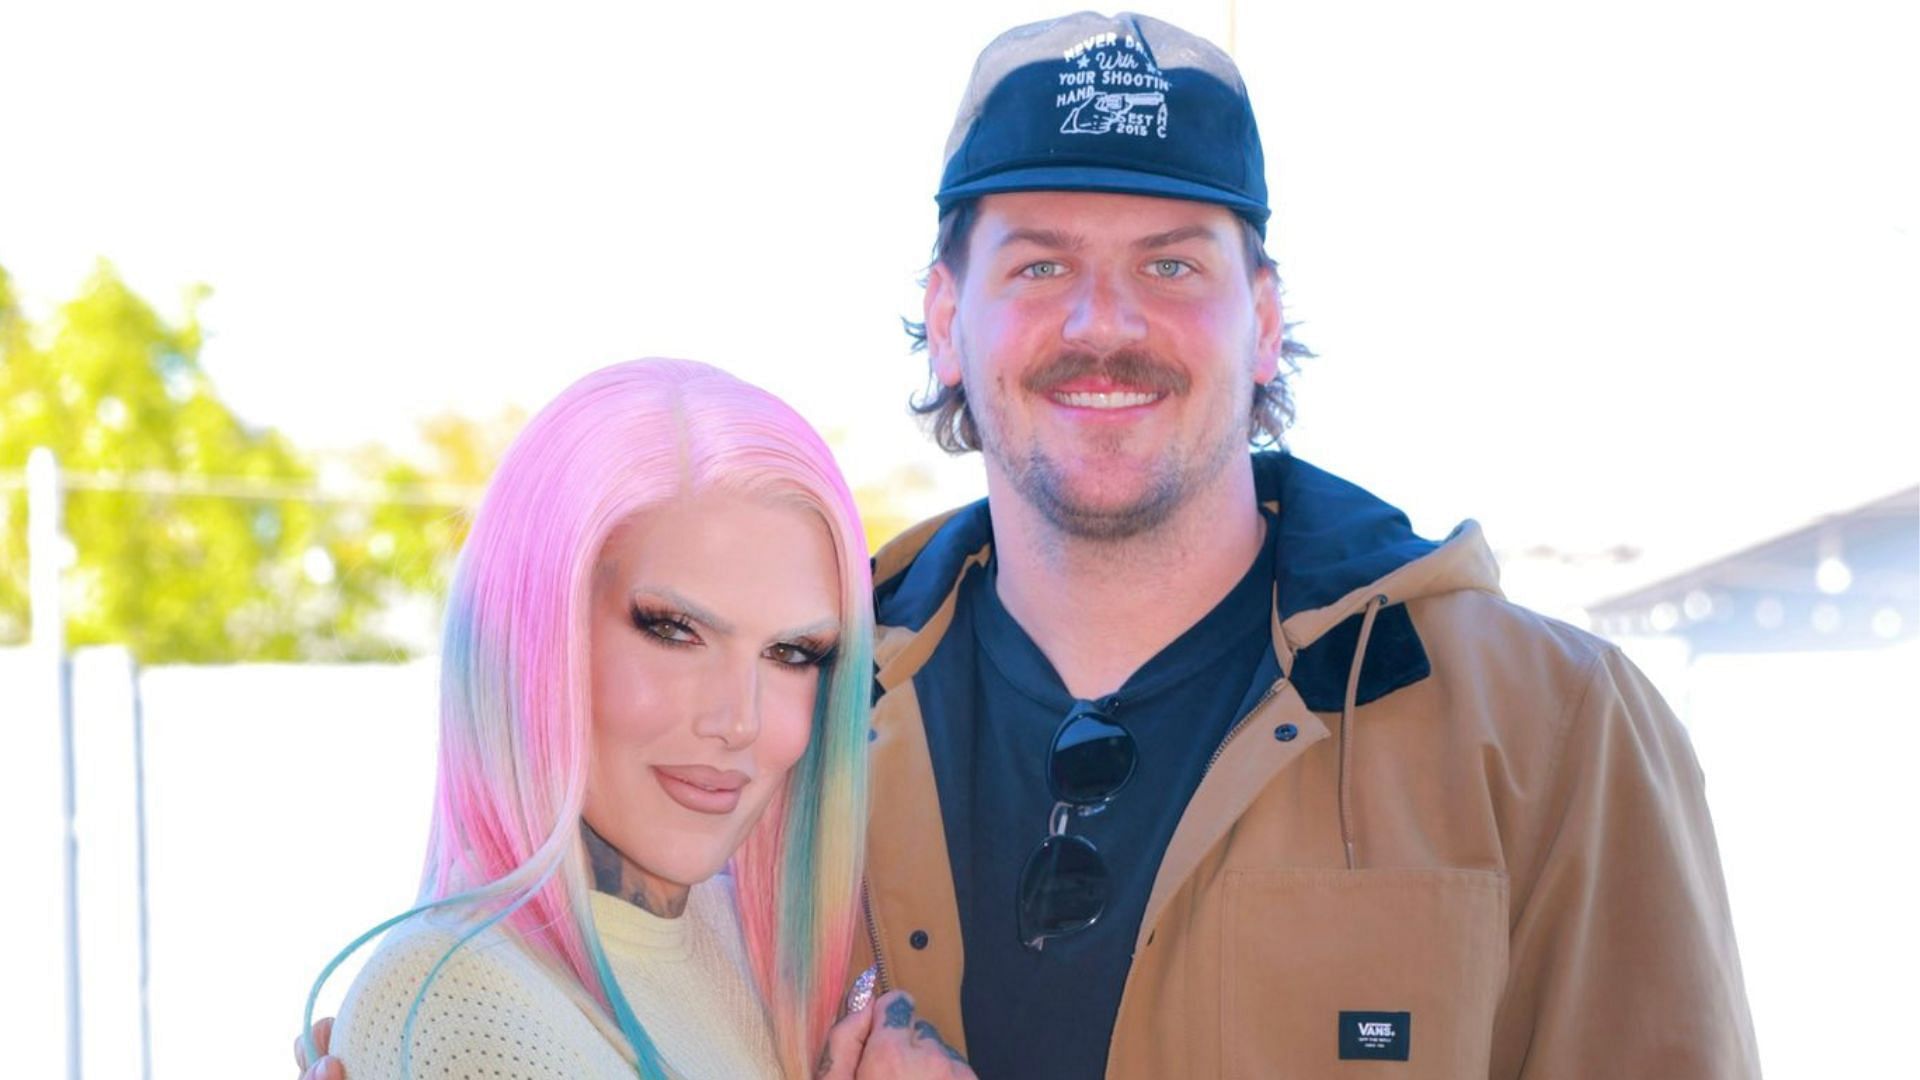 YouTuber and cosmetics mogul Jeffree Star took a photo with former NFL offensive lineman Taylor Lewan. (Image credit: Jeffree Star on Twitter)